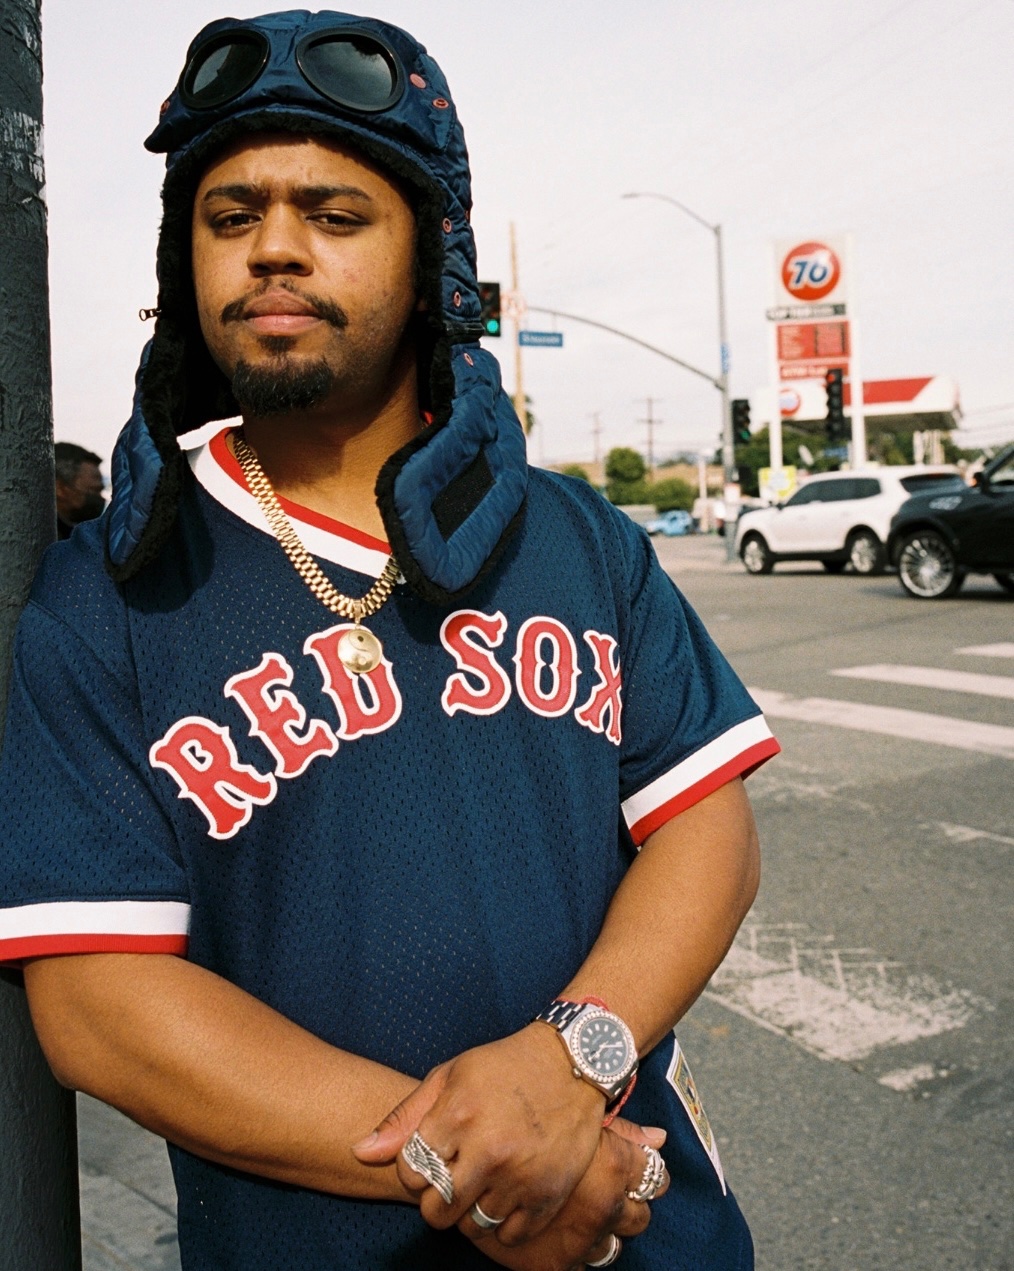 SNKR_TWITR on X: AD: MLB Opening Day - Mitchell and Ness Authentic BP  Jerseys Shop ->   / X